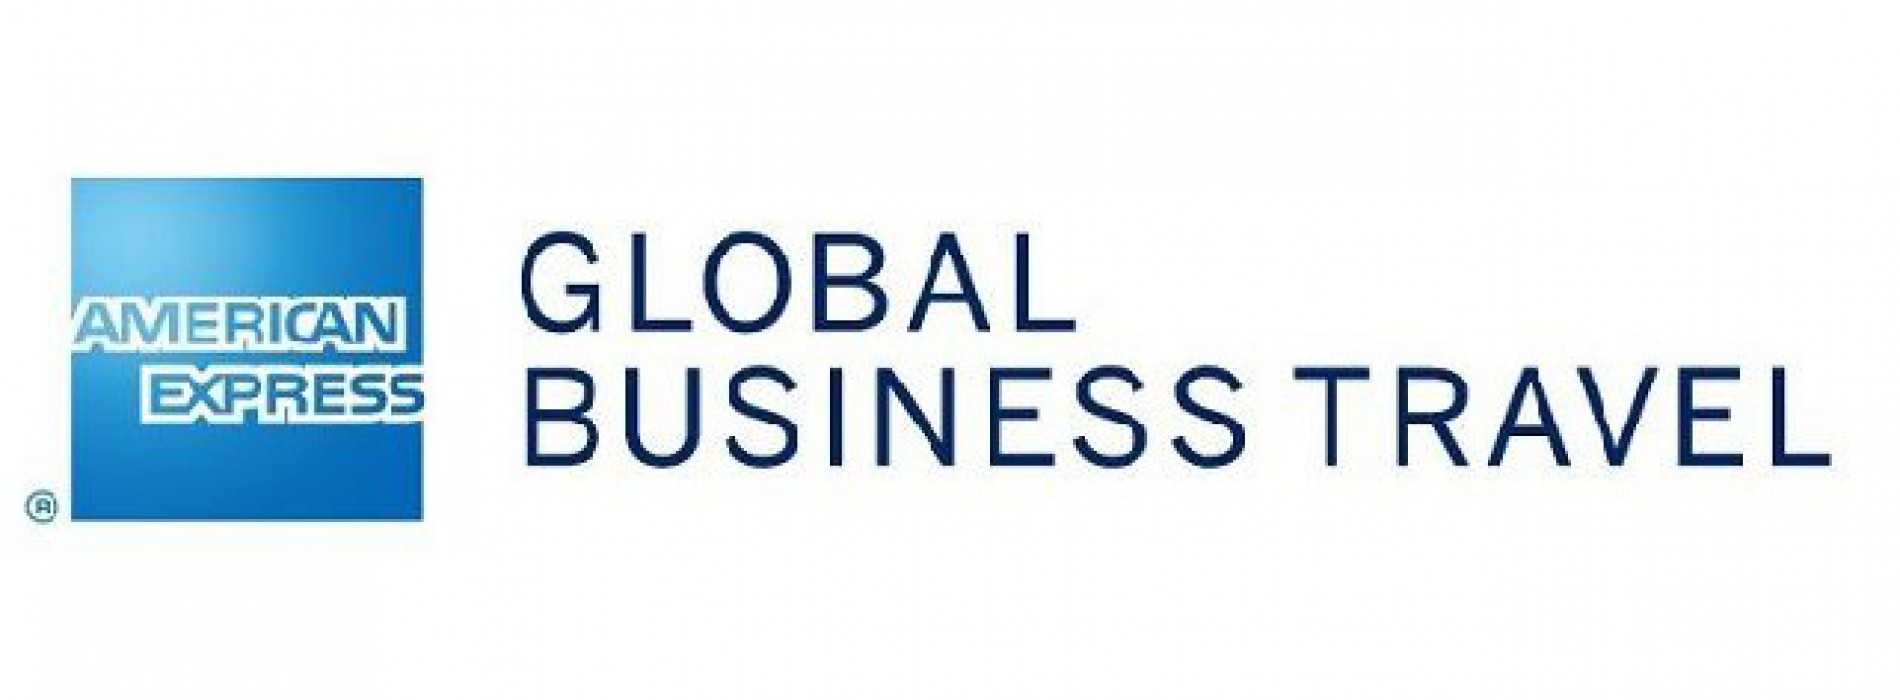 American Express Global Business Travel Completes Acquisition of Hogg  Robinson GroupAmerican Express Global Business Travel Completes Acquisition  of Hogg Robinson Group - TnHGlobal